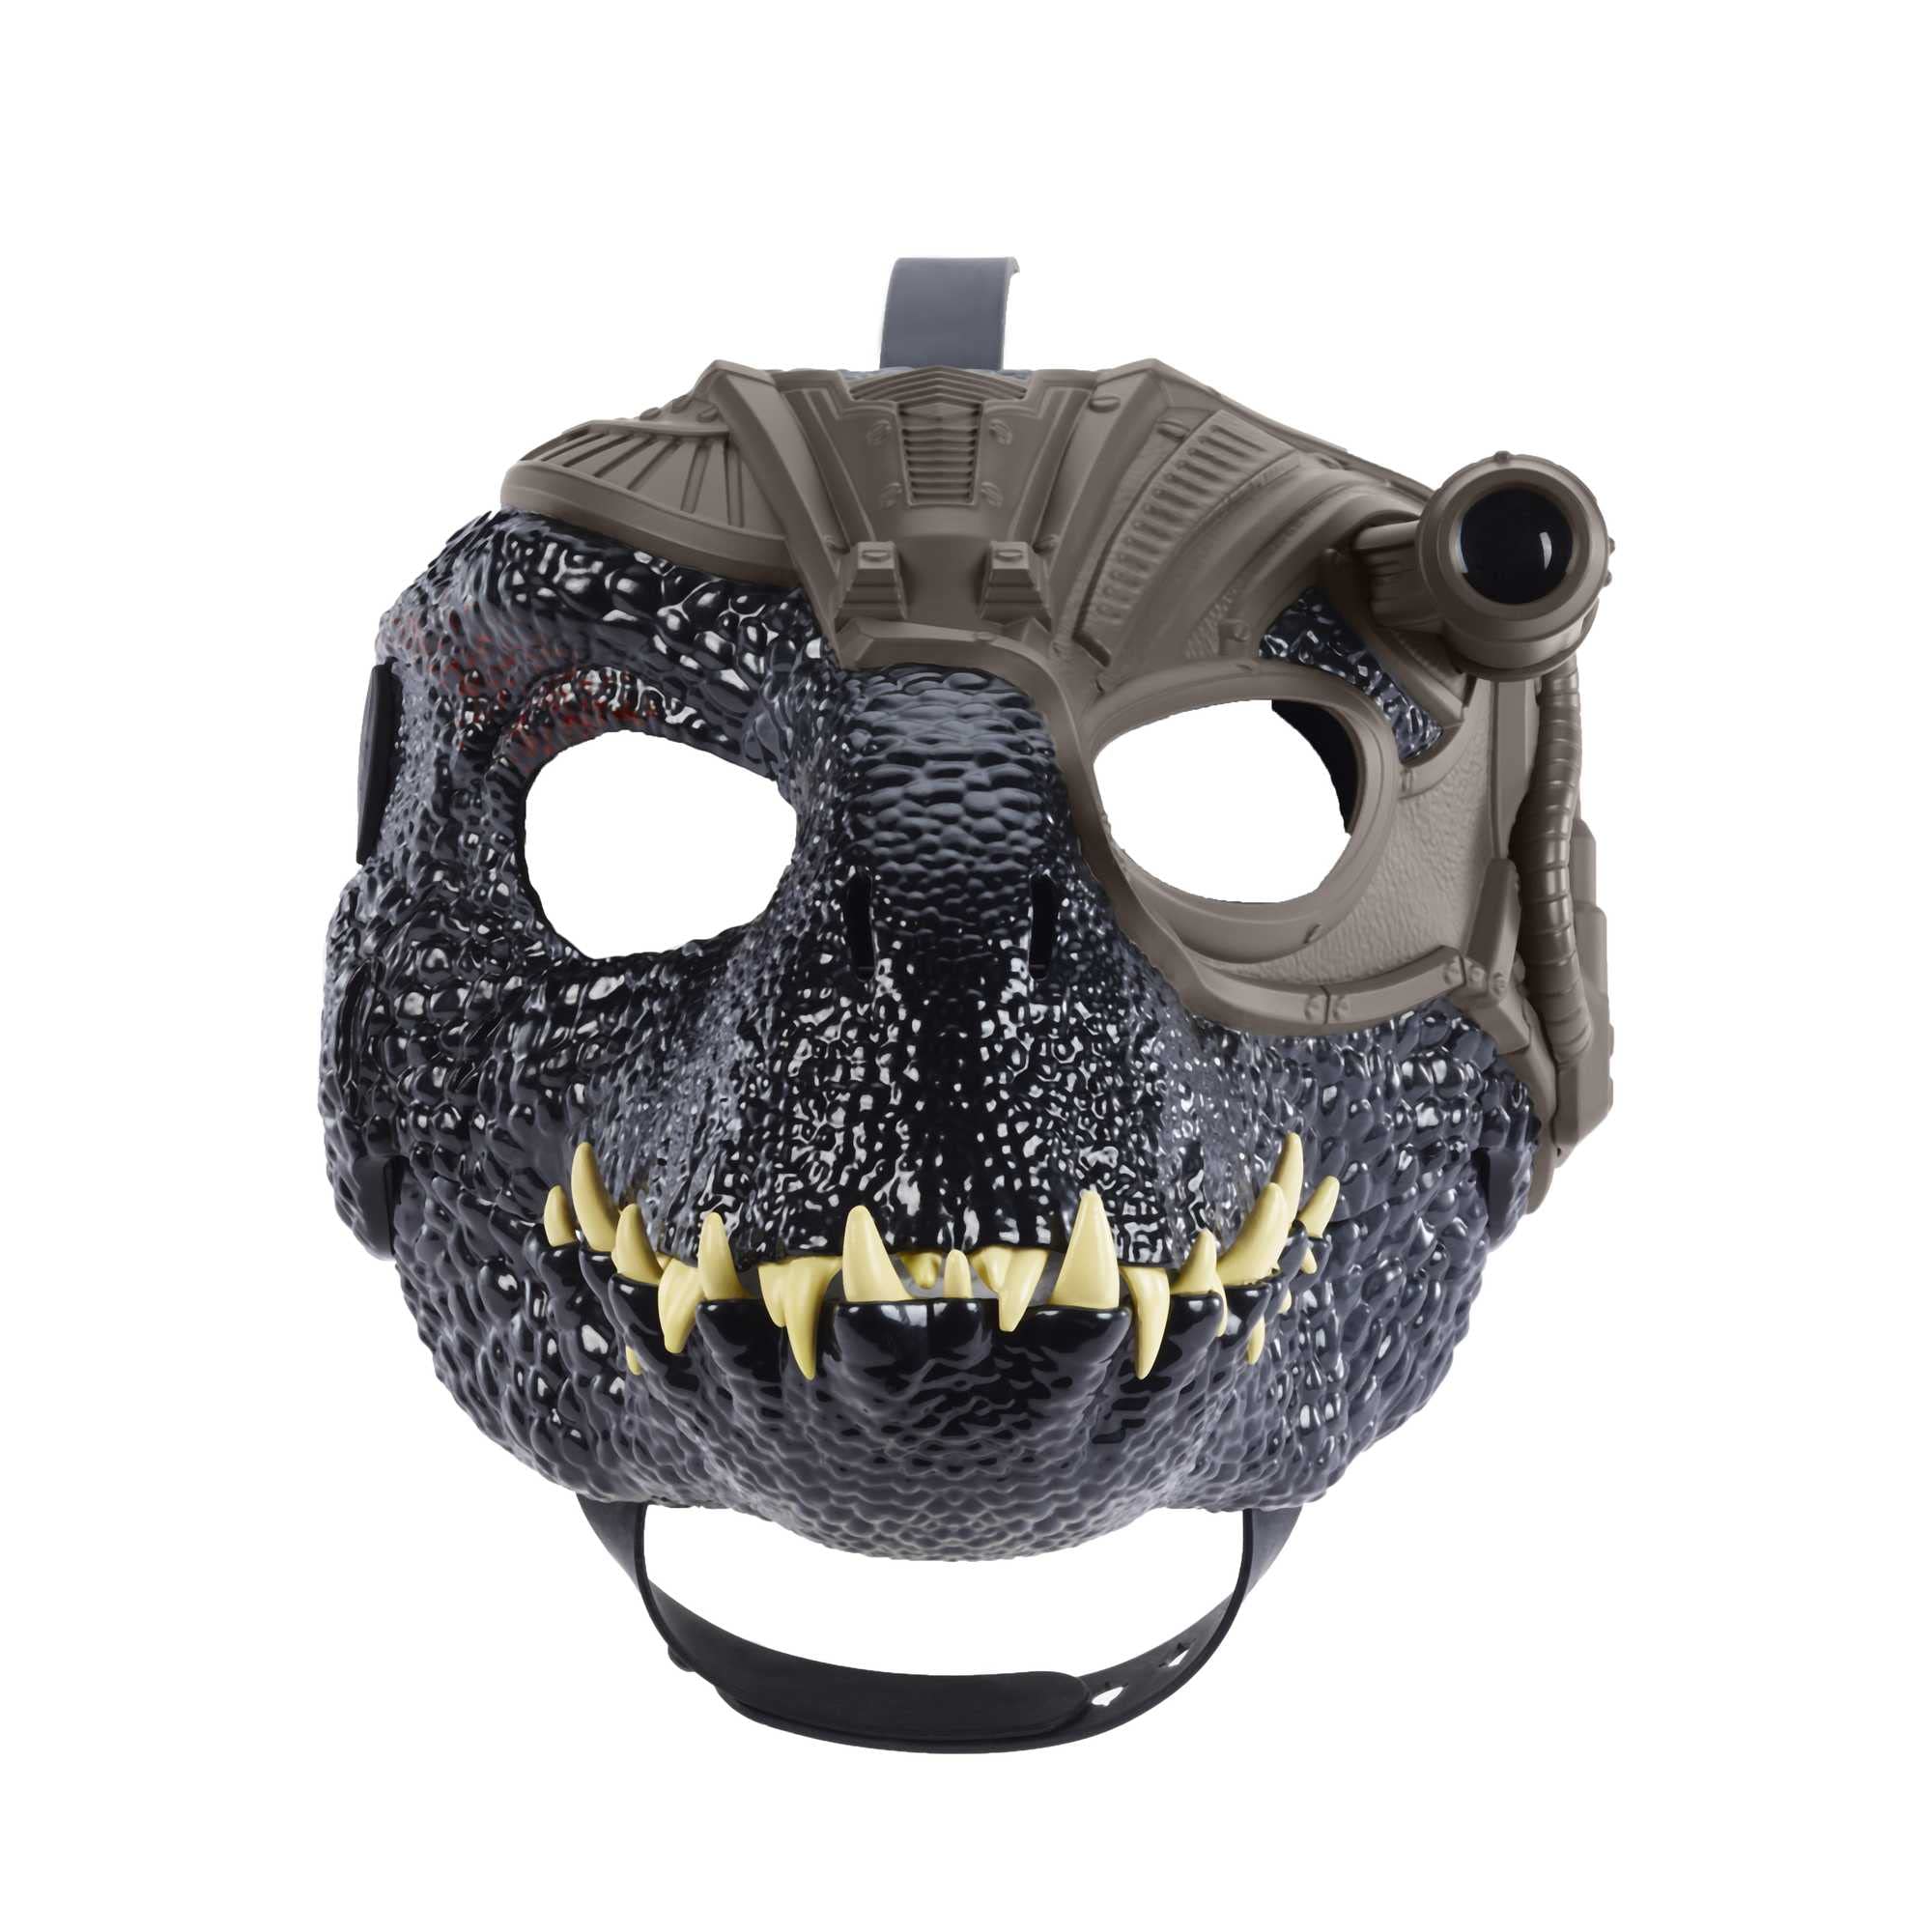 Jurassic World Indoraptor Dinosaur Mask with Tracking Gear, Light and Sound for Costumed Role Play